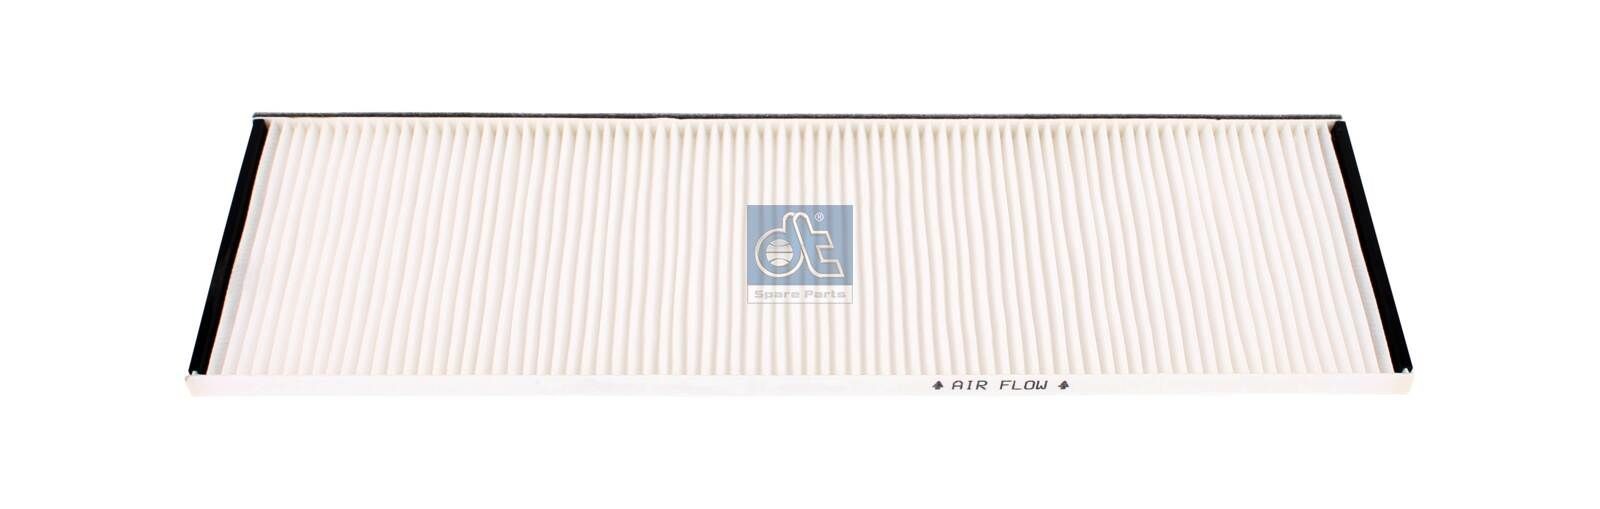 CU 4926 DT Spare Parts 4.63627 Air filter 1101194A